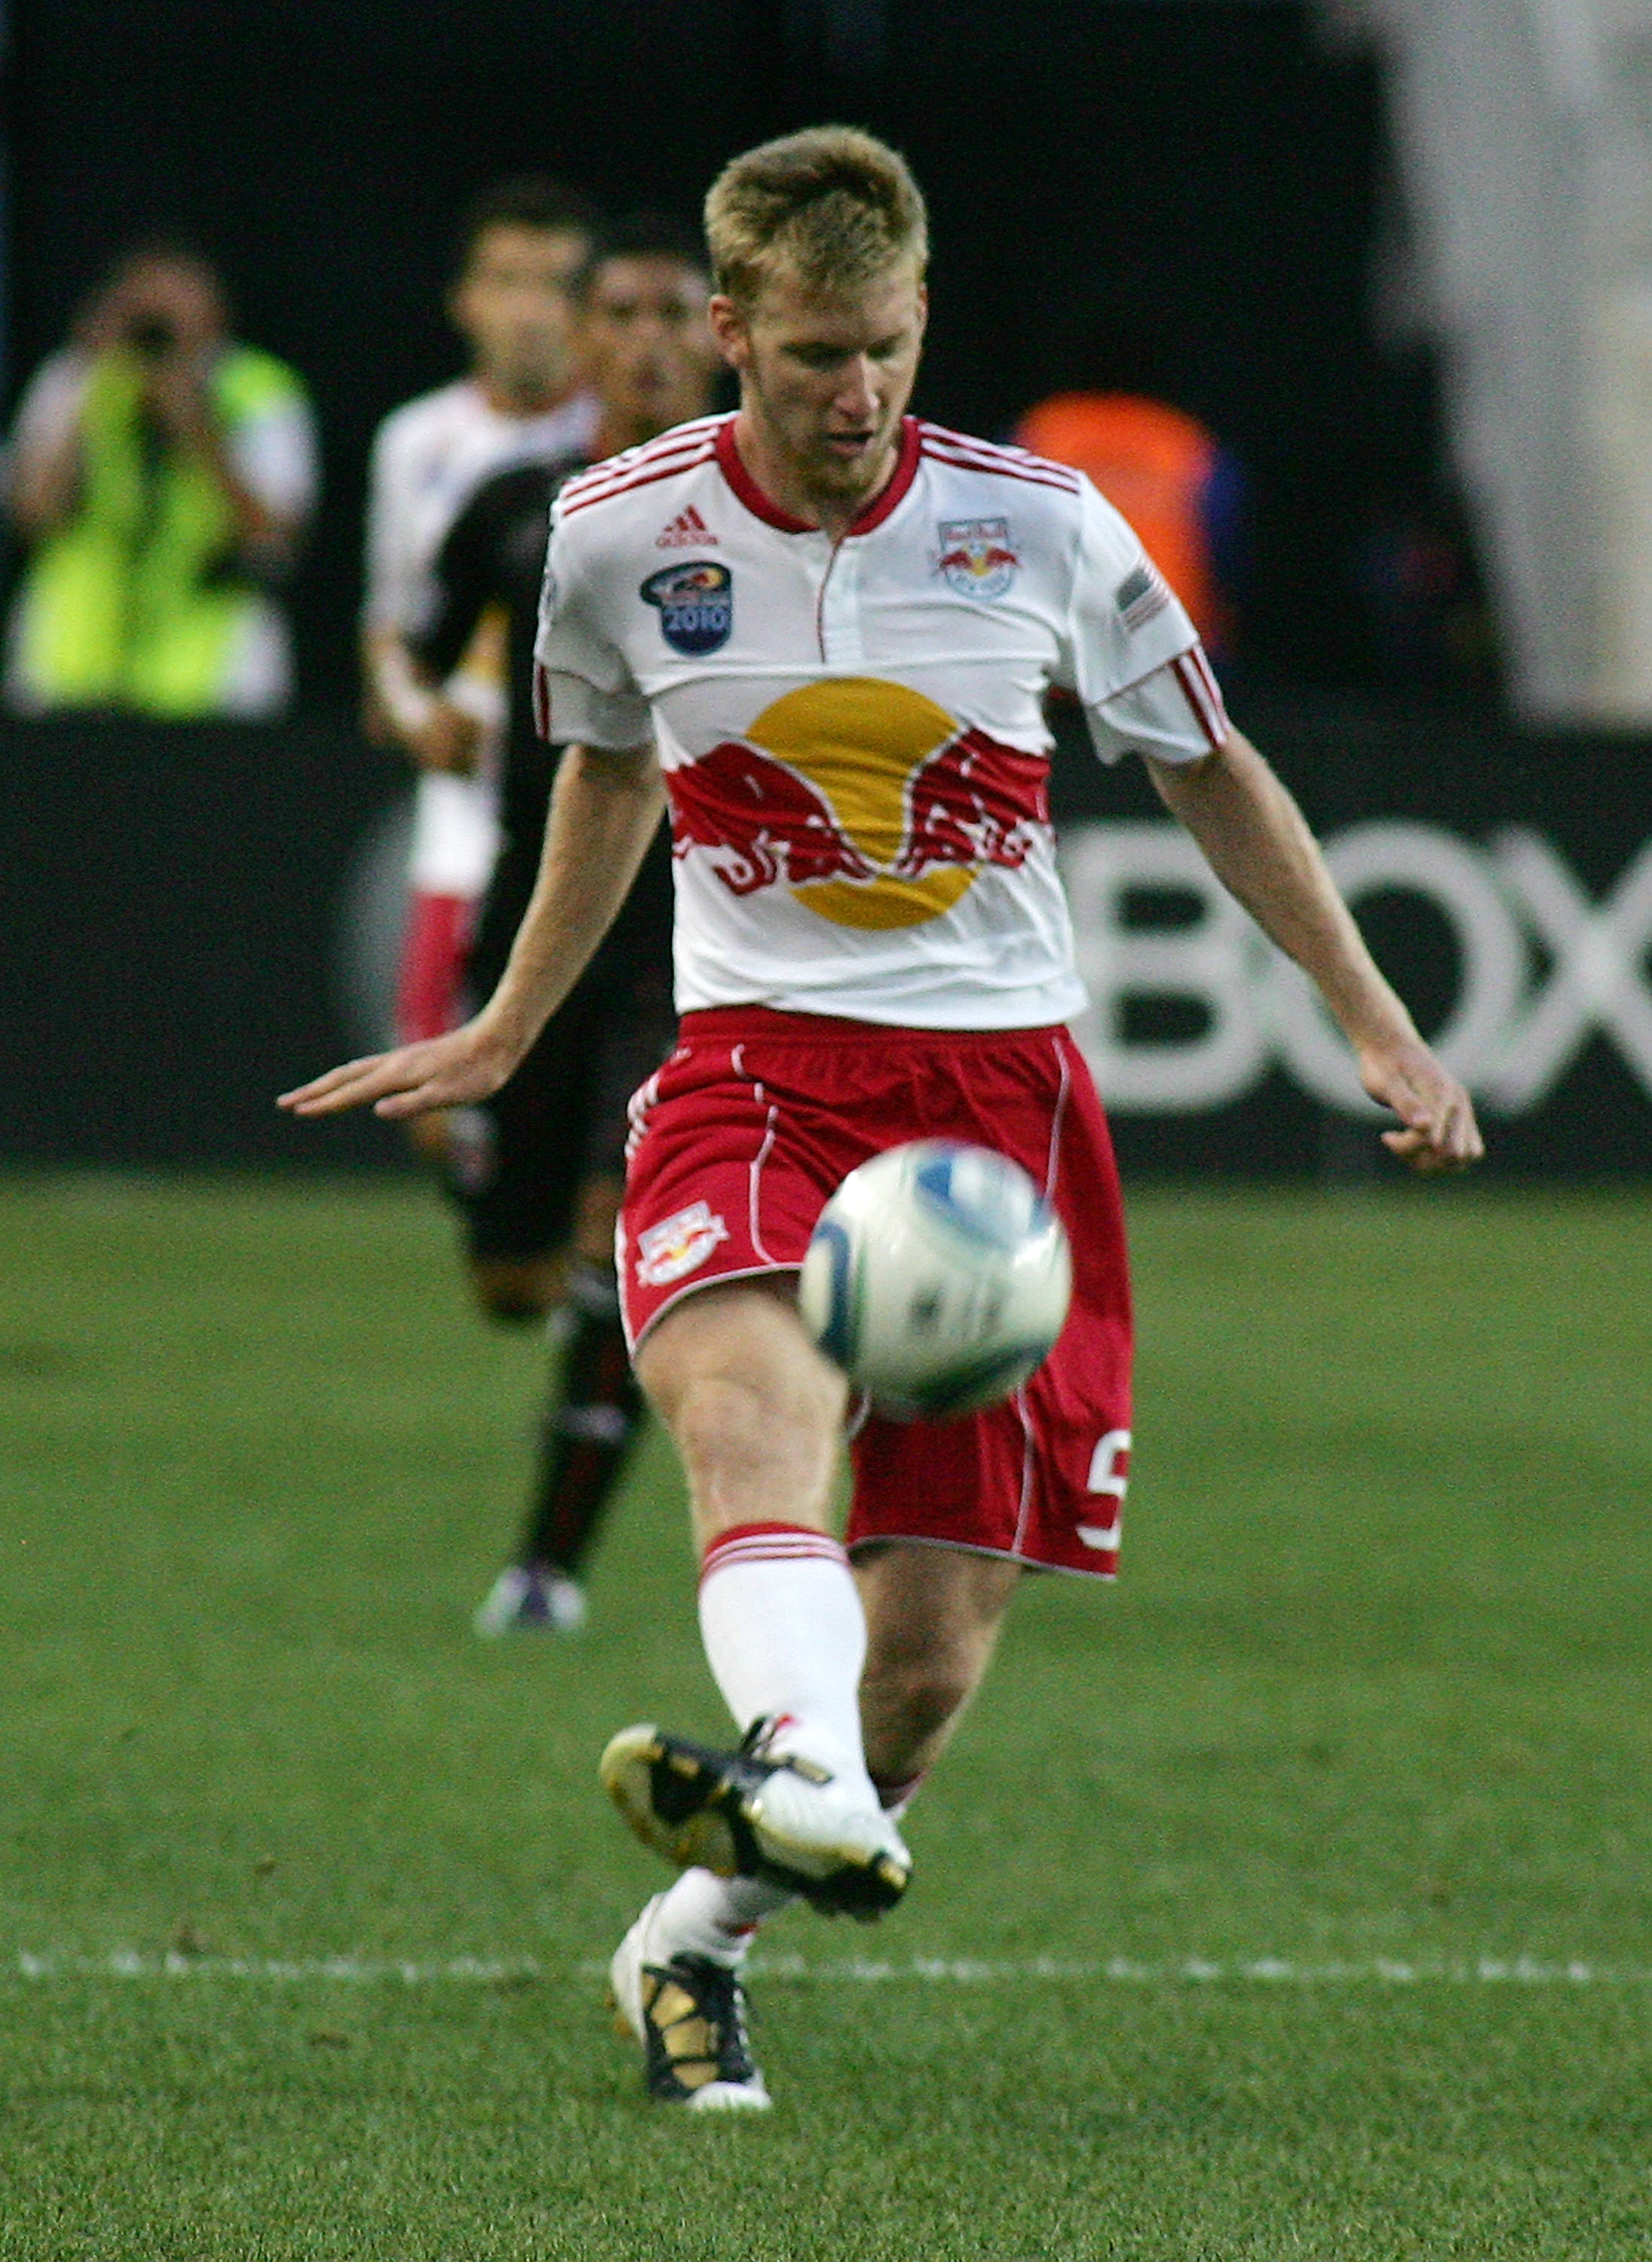 HARRISON, NJ - JULY 10: Tim Ream #5 of the New York Red Bulls plays the ball against D.C. United during their game at Red Bull Arena on July 10, 2010 in Harrison, New Jersey. (Photo by Andy Marlin/Getty Images)